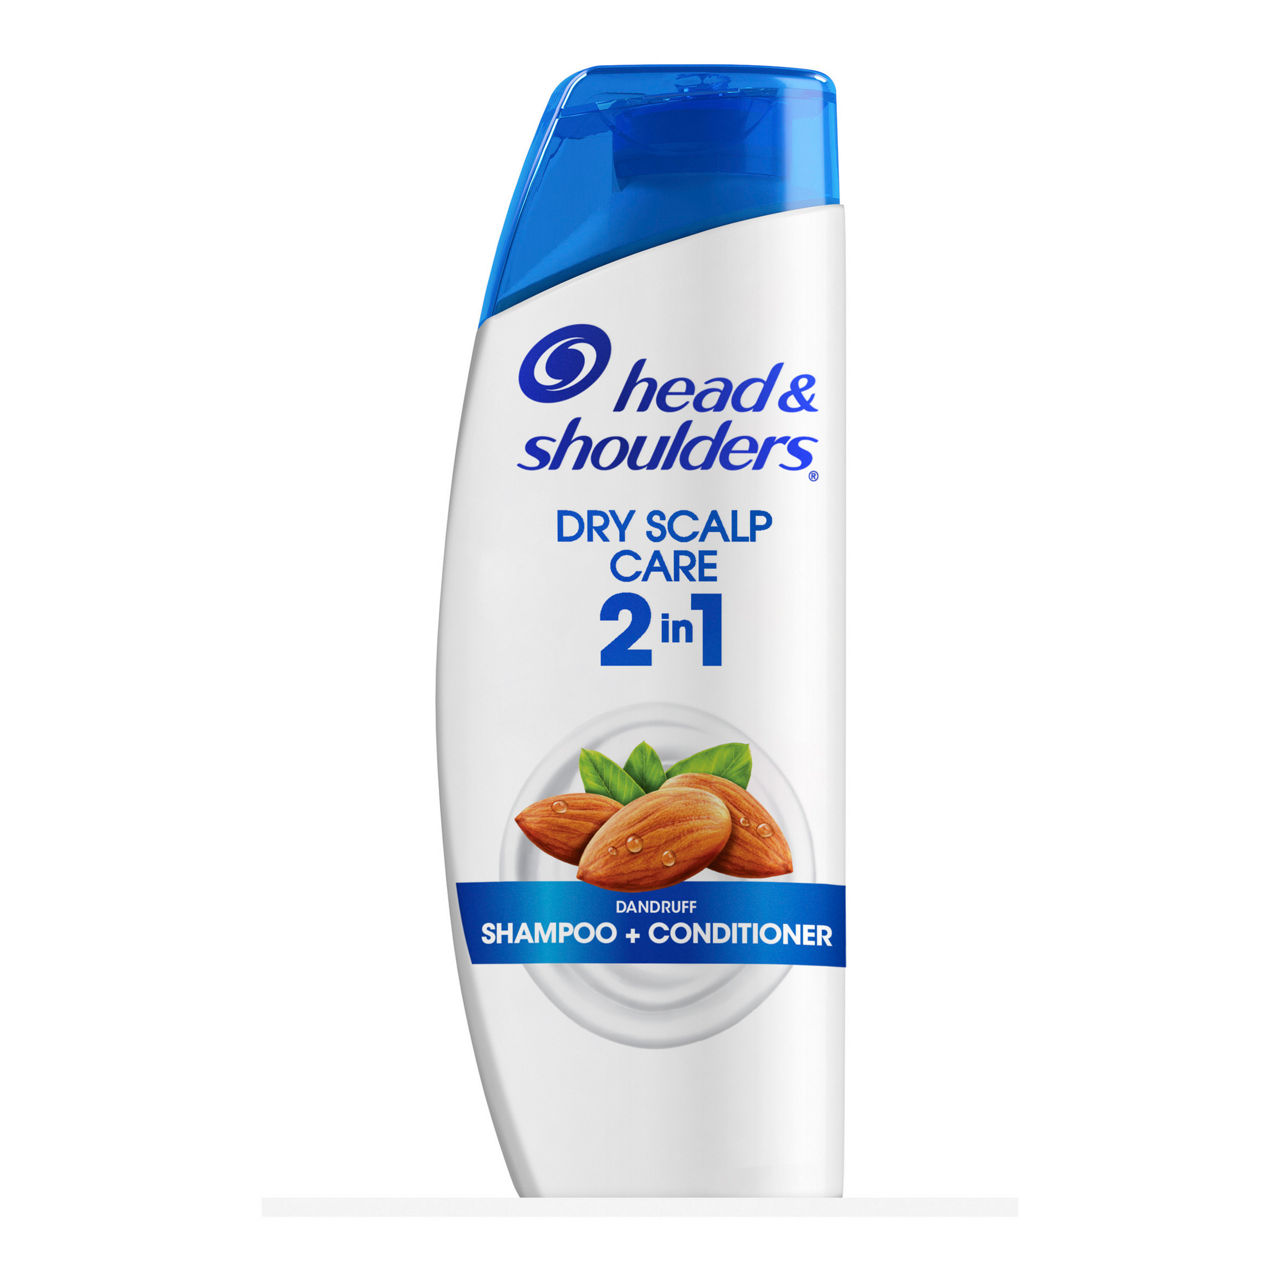 Head and Head and Shoulders in 1 Dandruff Shampoo and Conditioner, Anti-Dandruff Dry Scalp Care for Daily Use, Paraben Free, 8.45 oz | Big Lots